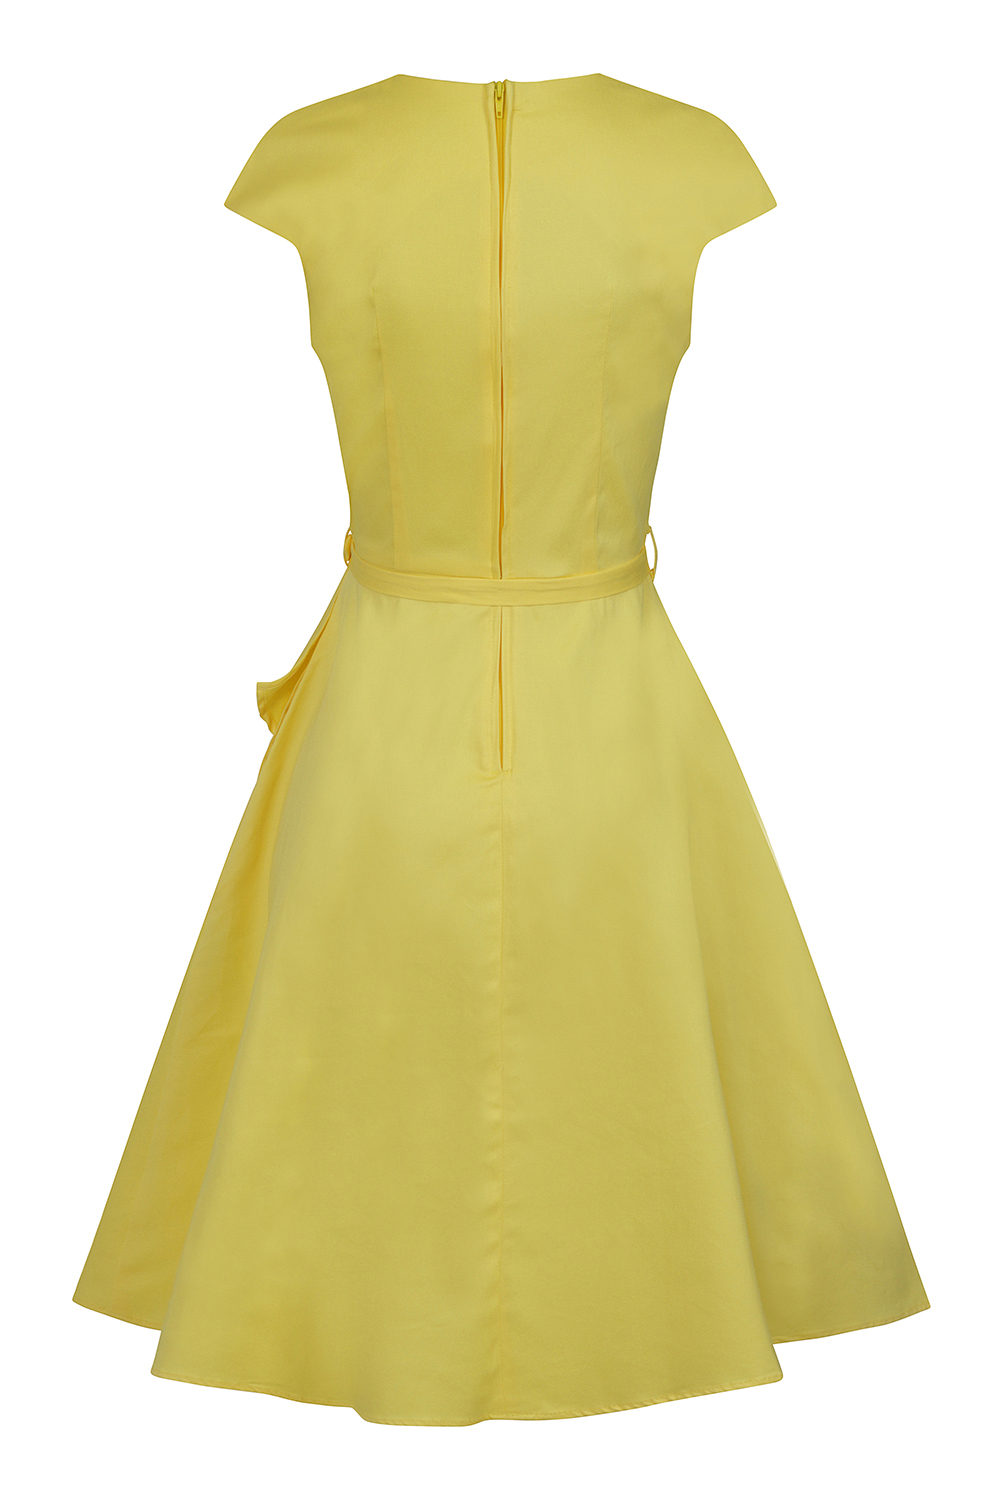 Elaine Summer Dress in Yellow - Hearts & Roses London